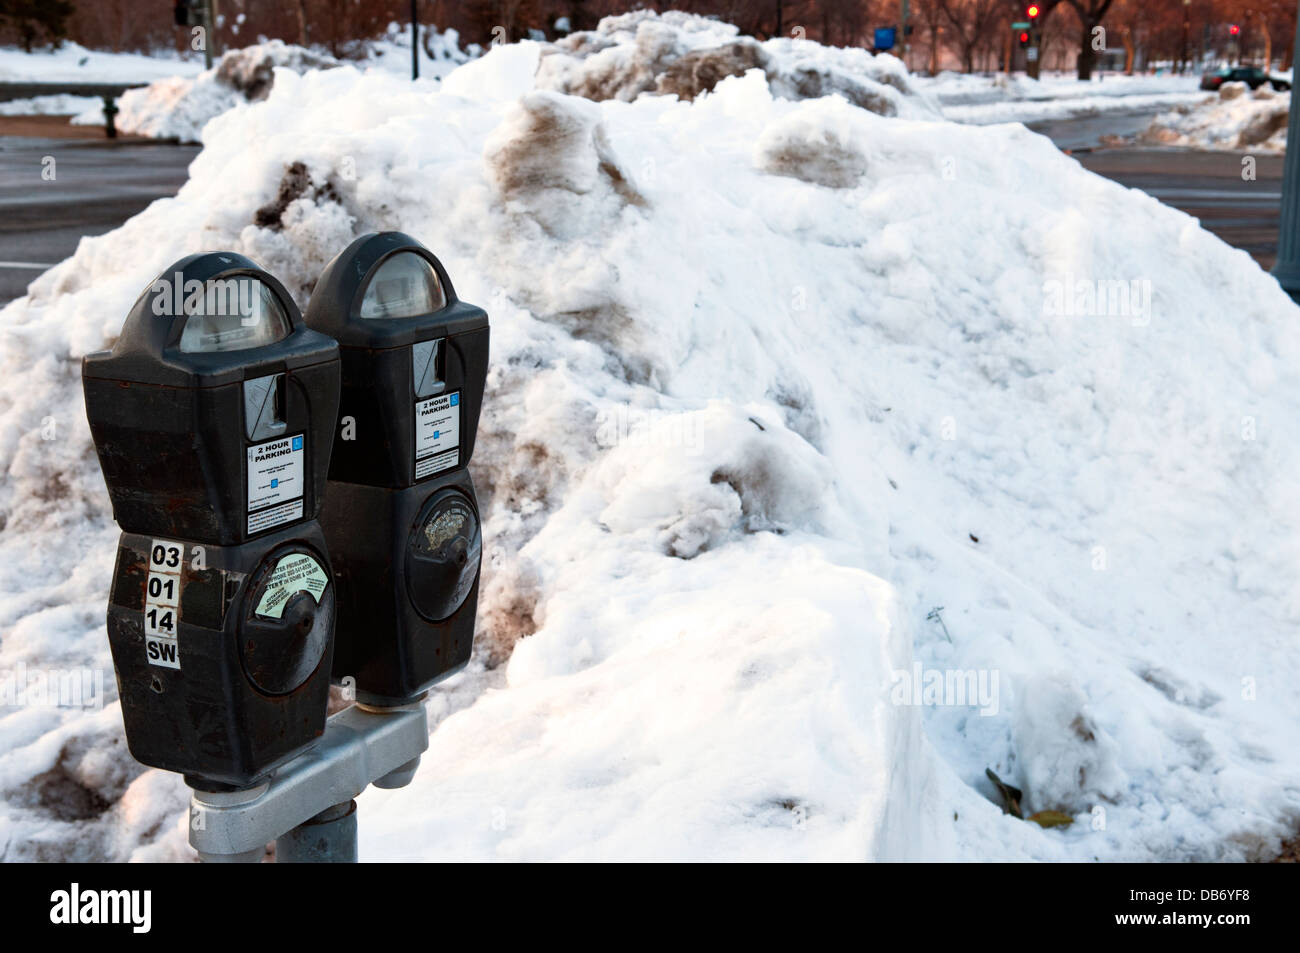 Snow piled up by parking meters in Washington DC Stock Photo